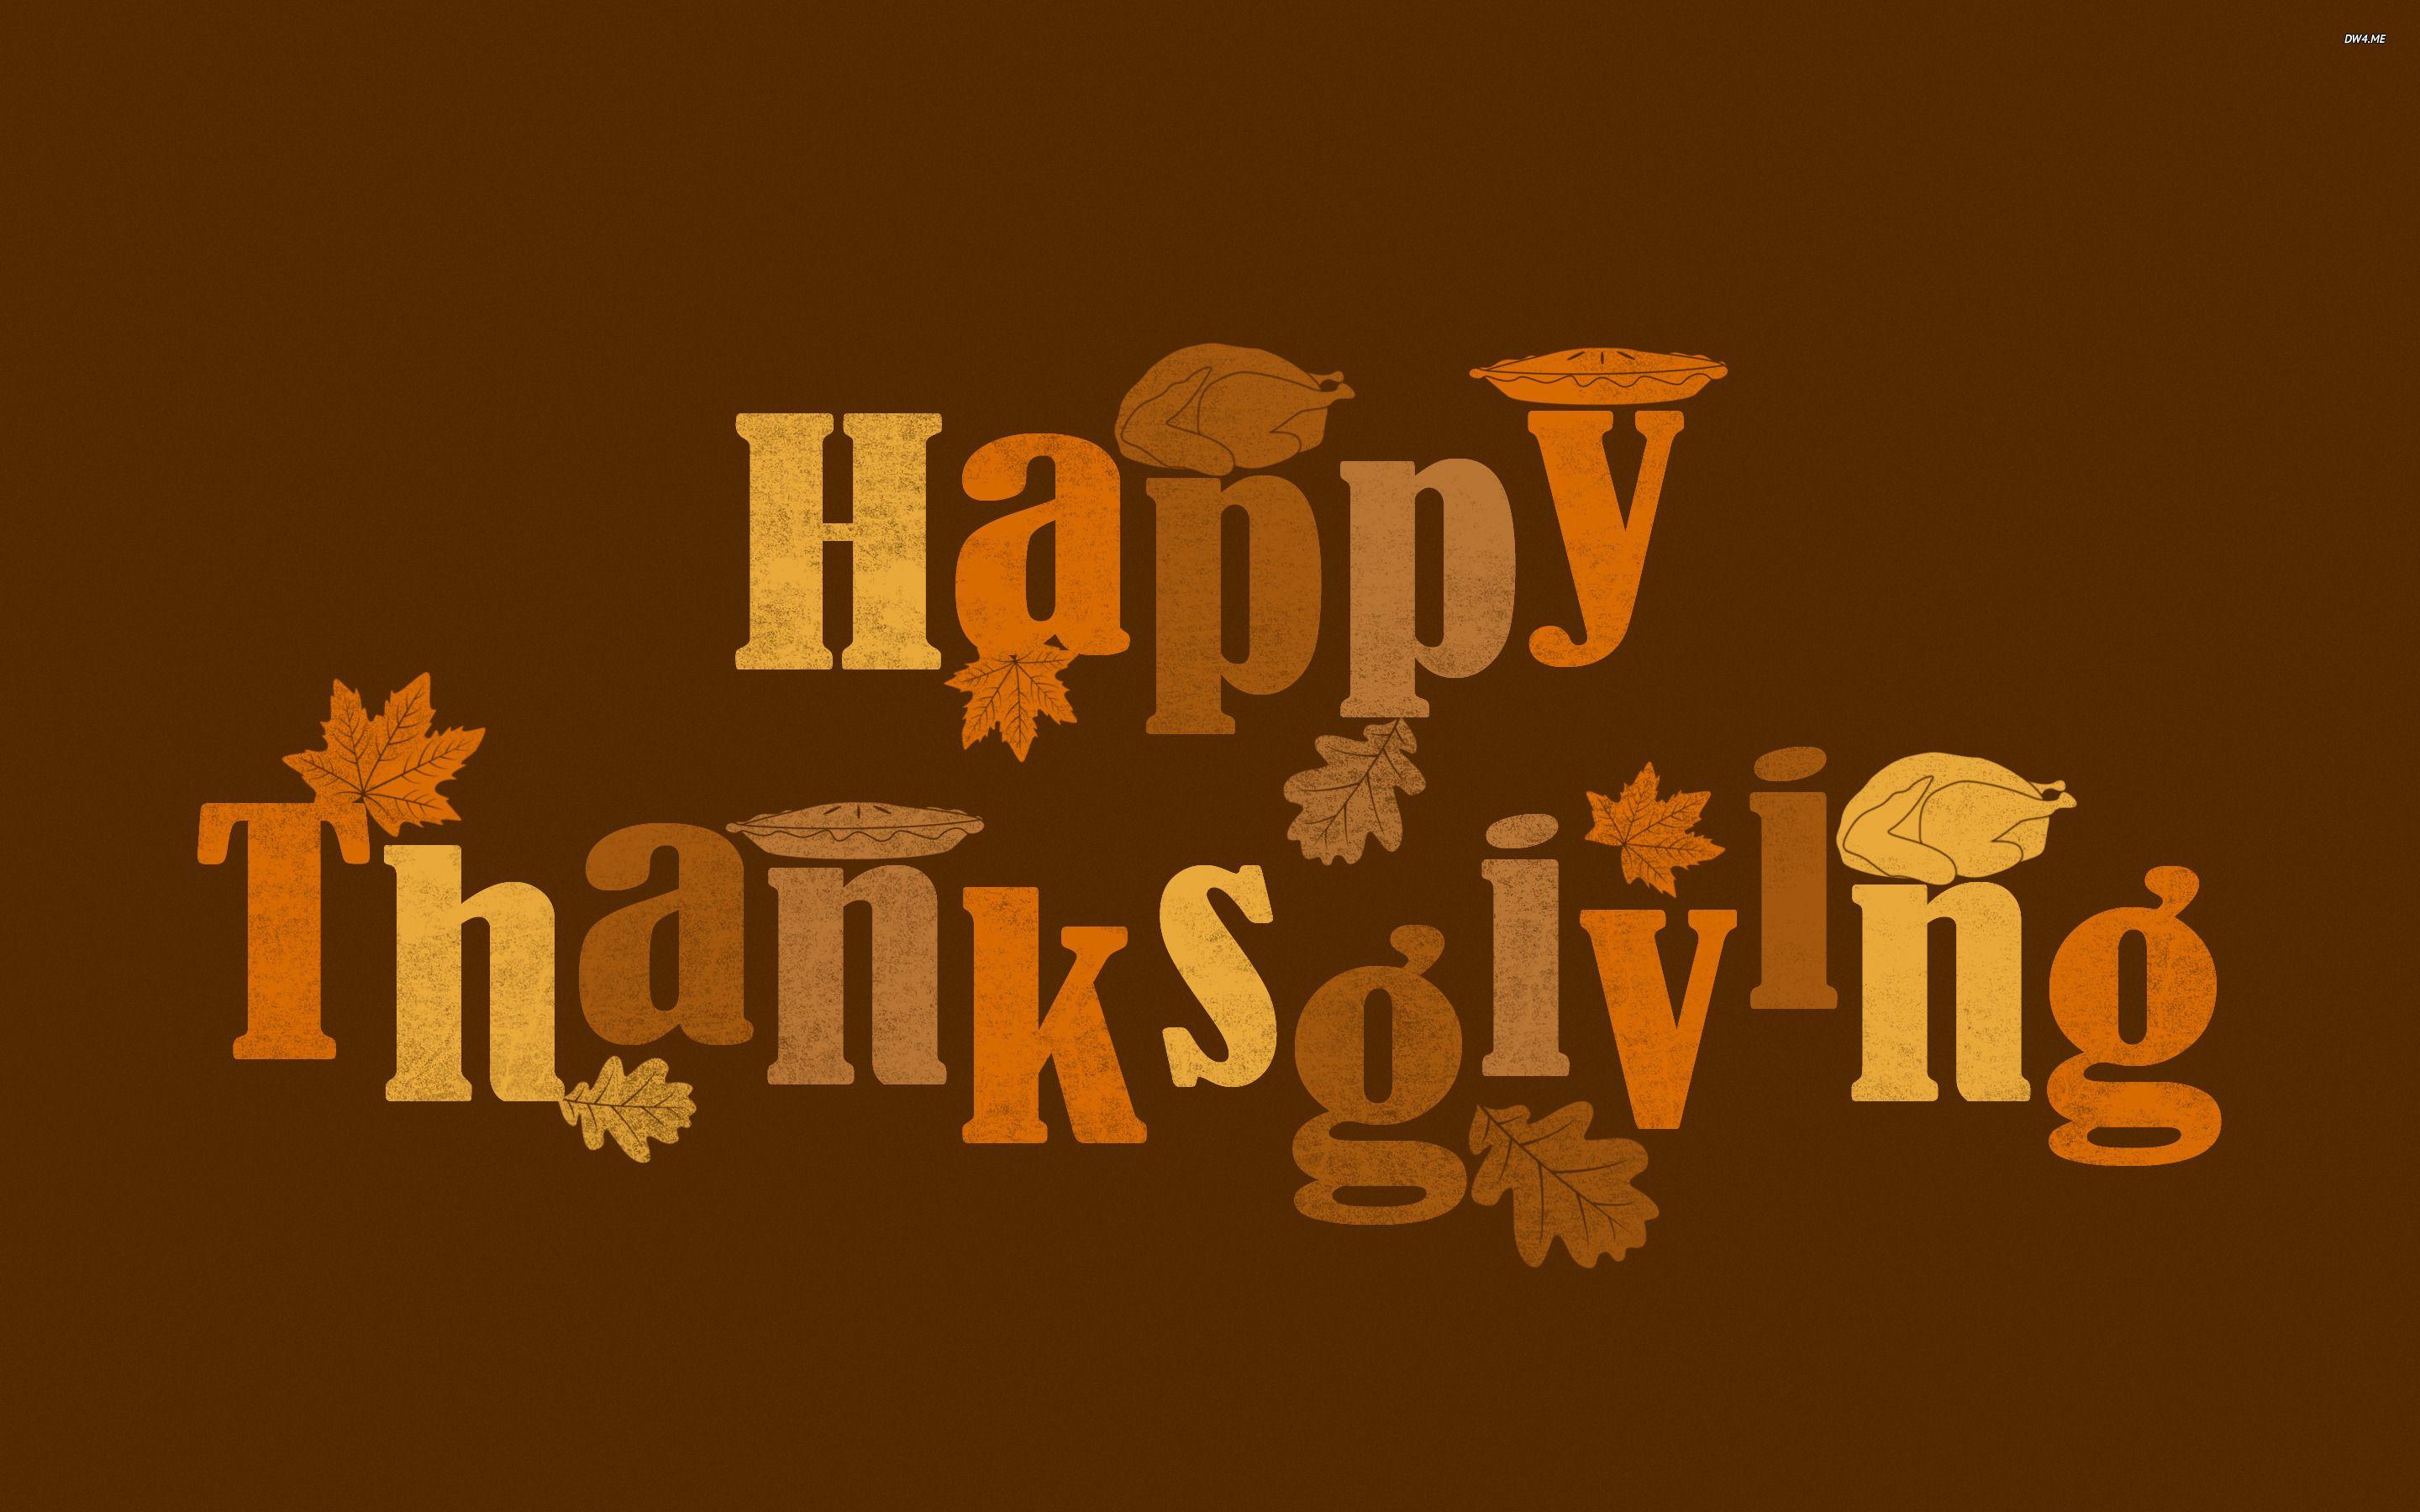 Happy Thanksgiving! wallpaper. Vintage thanksgiving greetings, Thanksgiving greetings, Thanksgiving facebook covers